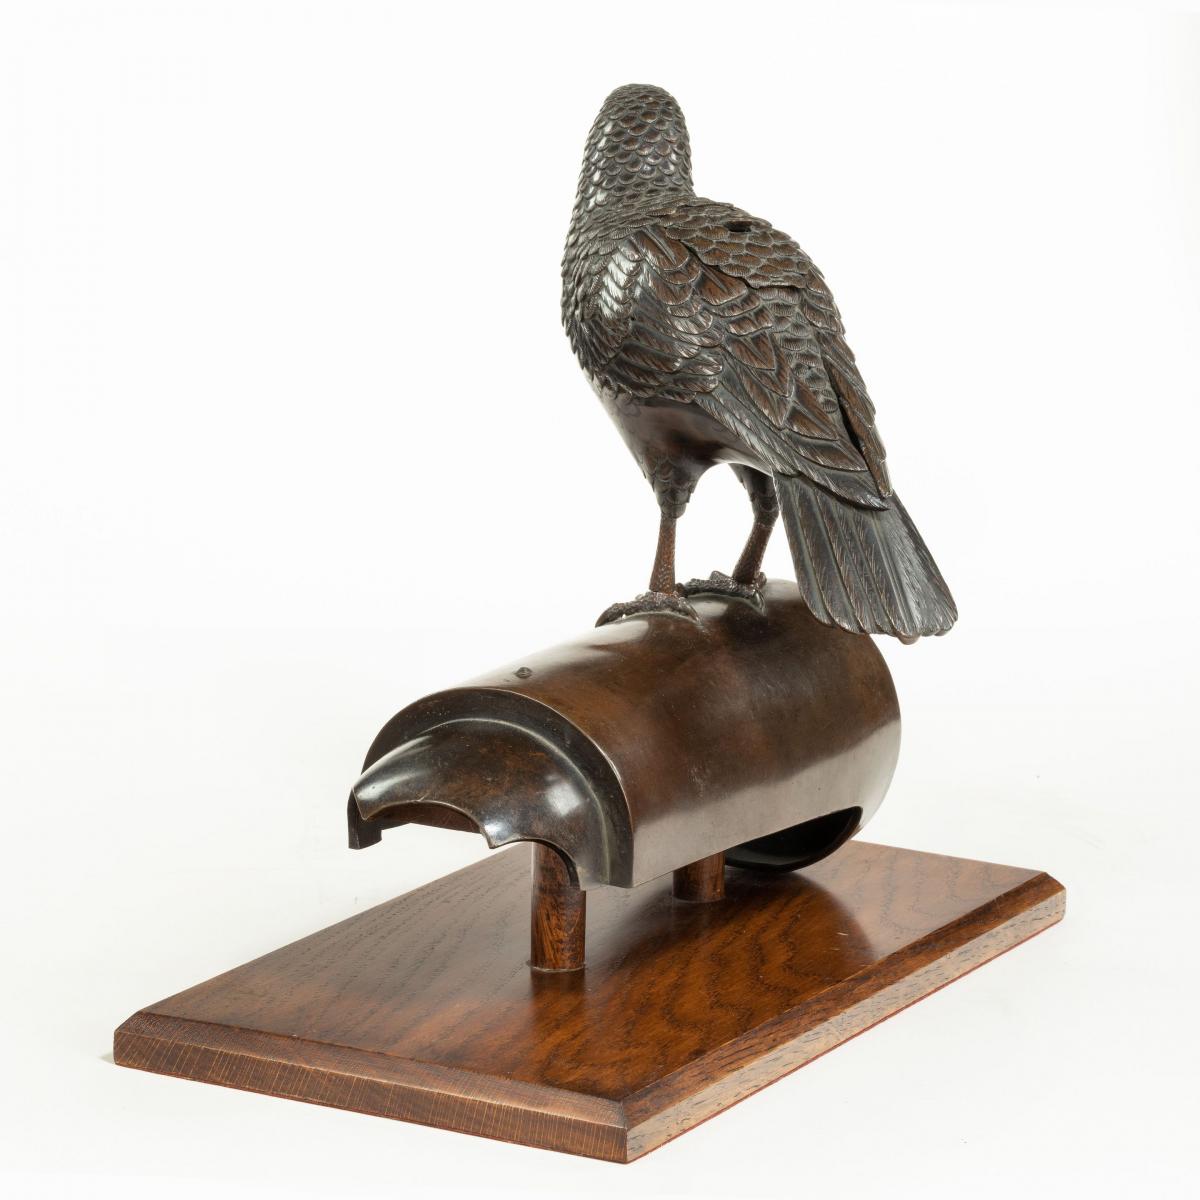 Meiji period bronze koro in the form of a dove on a roof tile